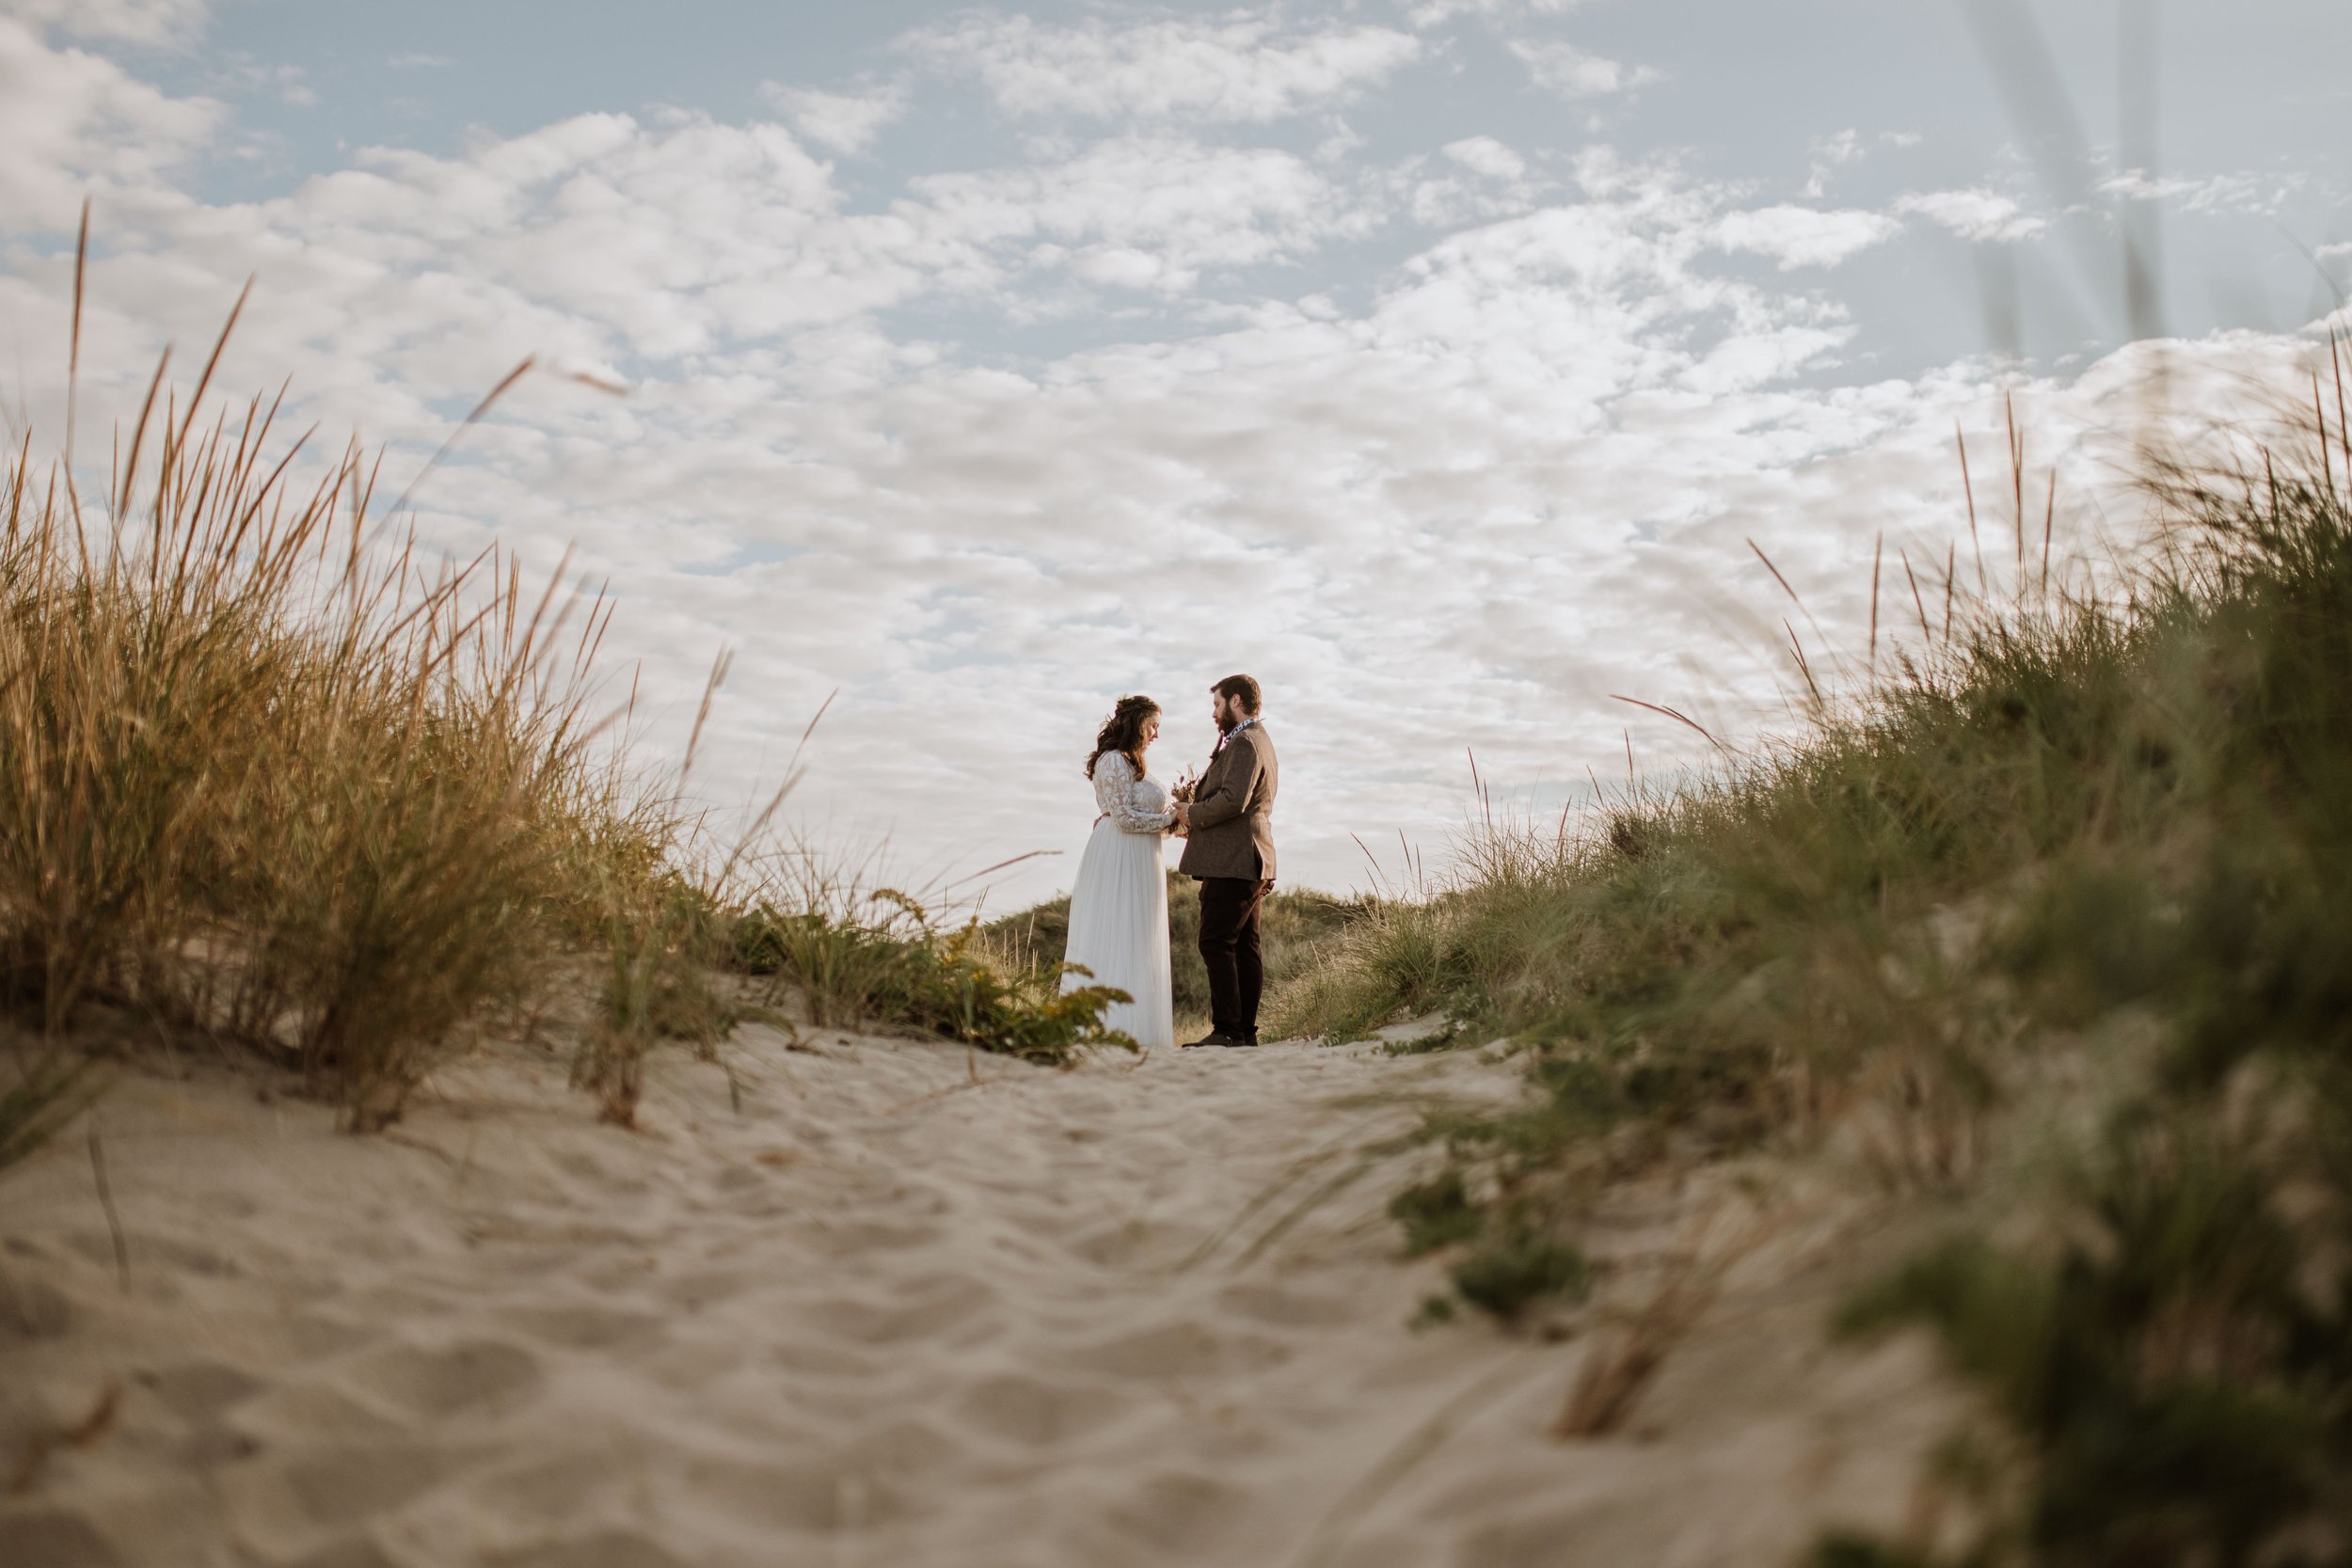 Couple exchanging vows along a sandy trail at the Cape Cod seashore.